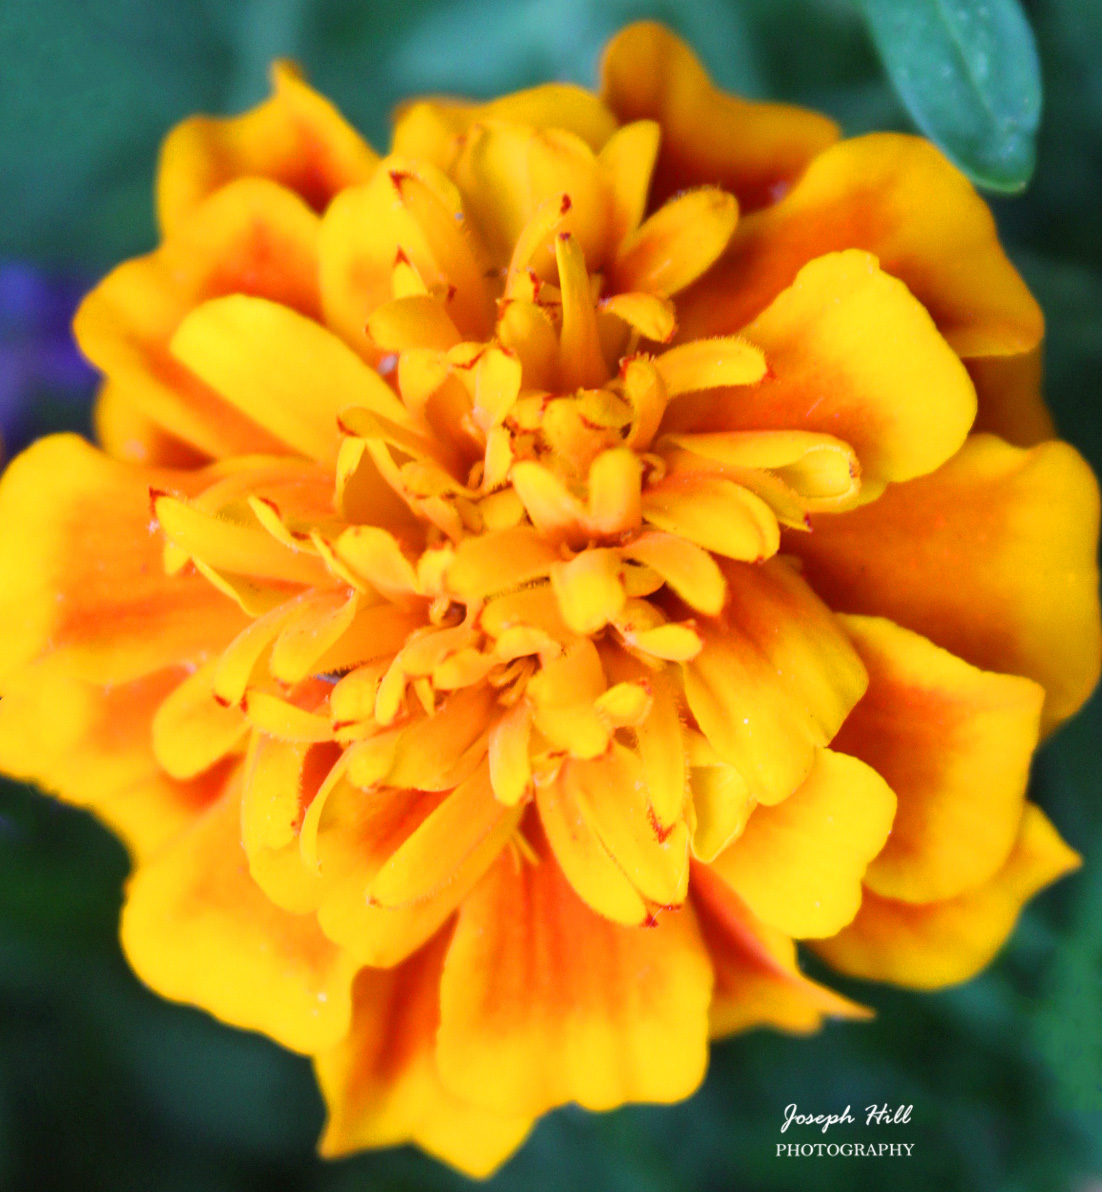 Marigold🌼
Photo By: Joseph Hill🙂📸🌼

#Marigold🌼 #flower #nature #spring #beautiful #colorful #Peaceful #NaturePhotography #flowerphotography #SouthernPinesNC #May